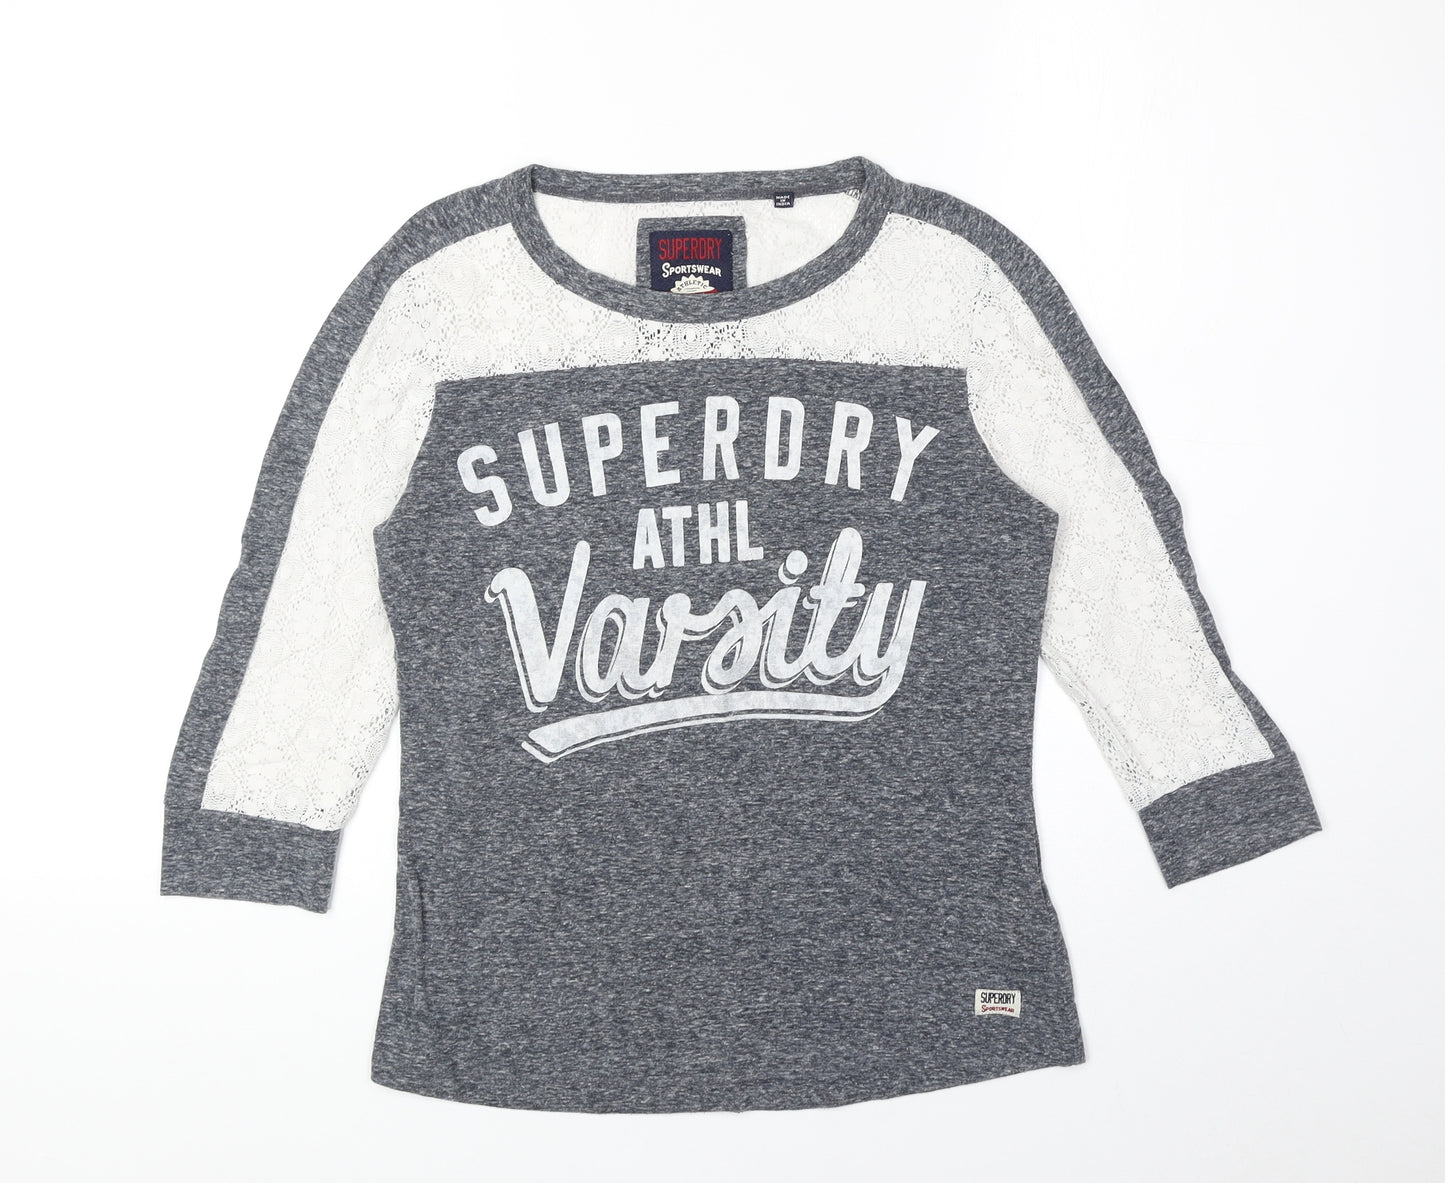 Superdry Womens Grey Polyester Ringer Blouse Size XS Scoop Neck - Crochet Details